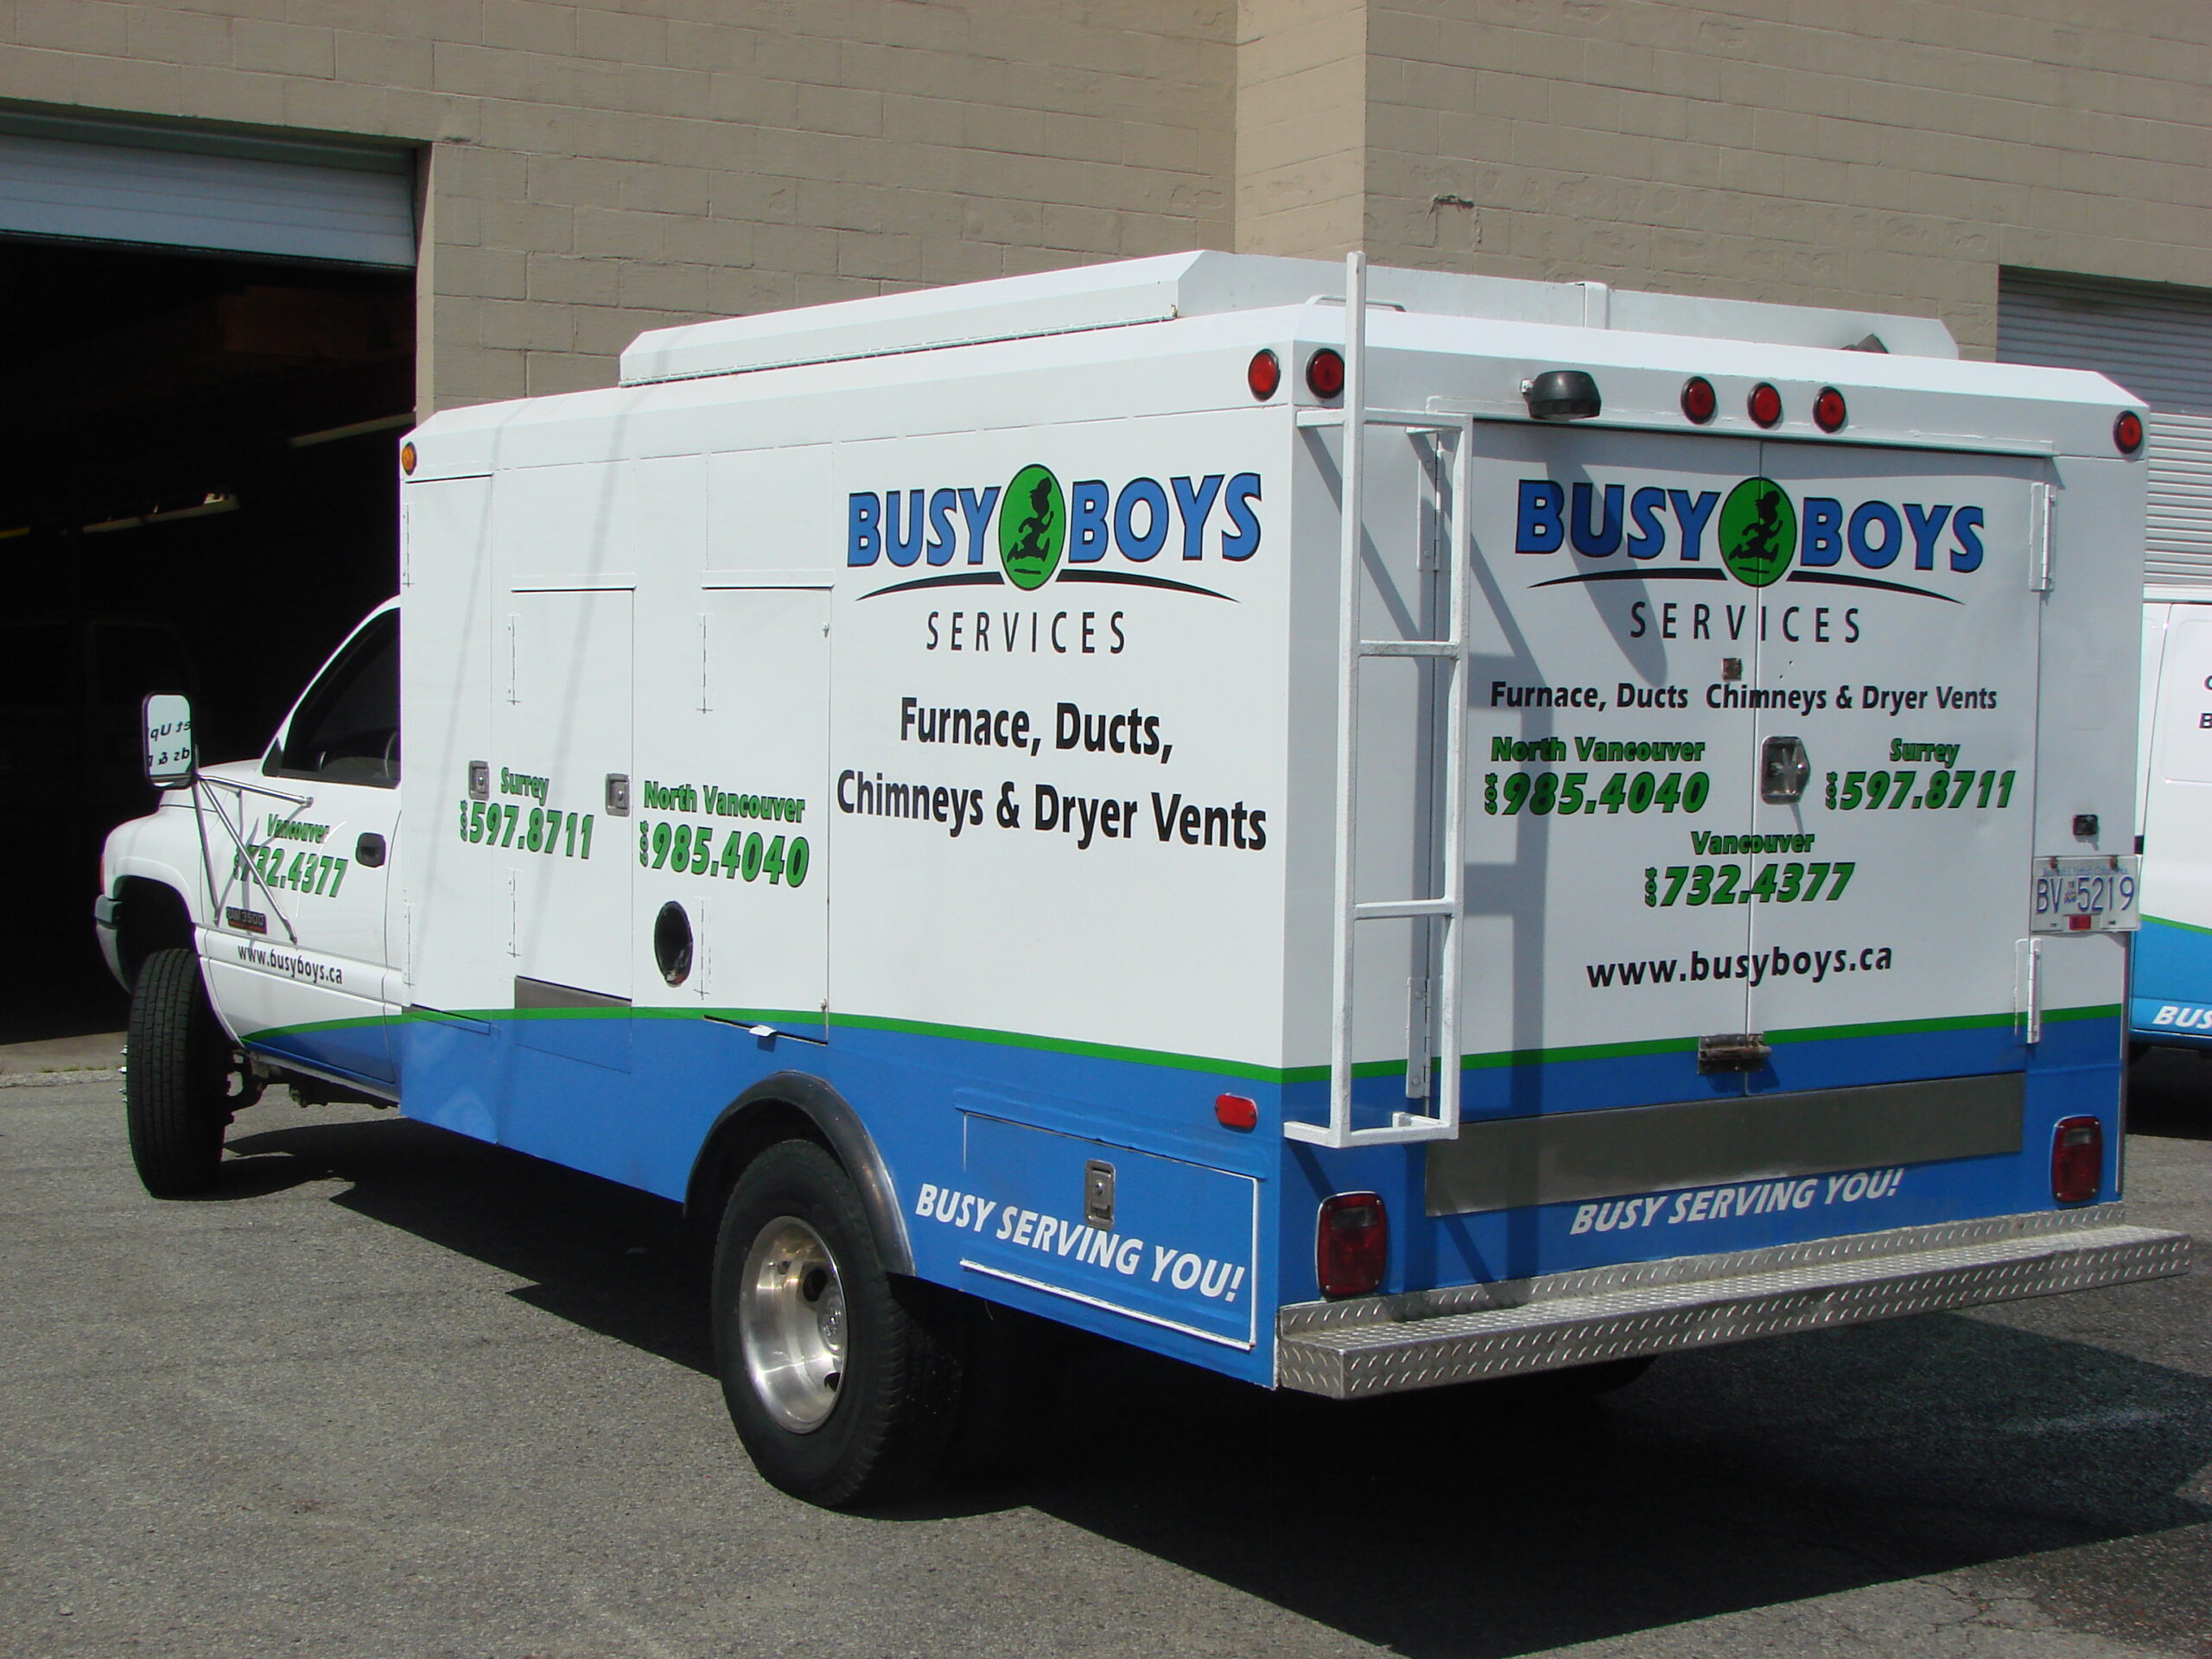 Busy Boys offering Furnace and Duct Cleaning Services in Coquitlam, BC